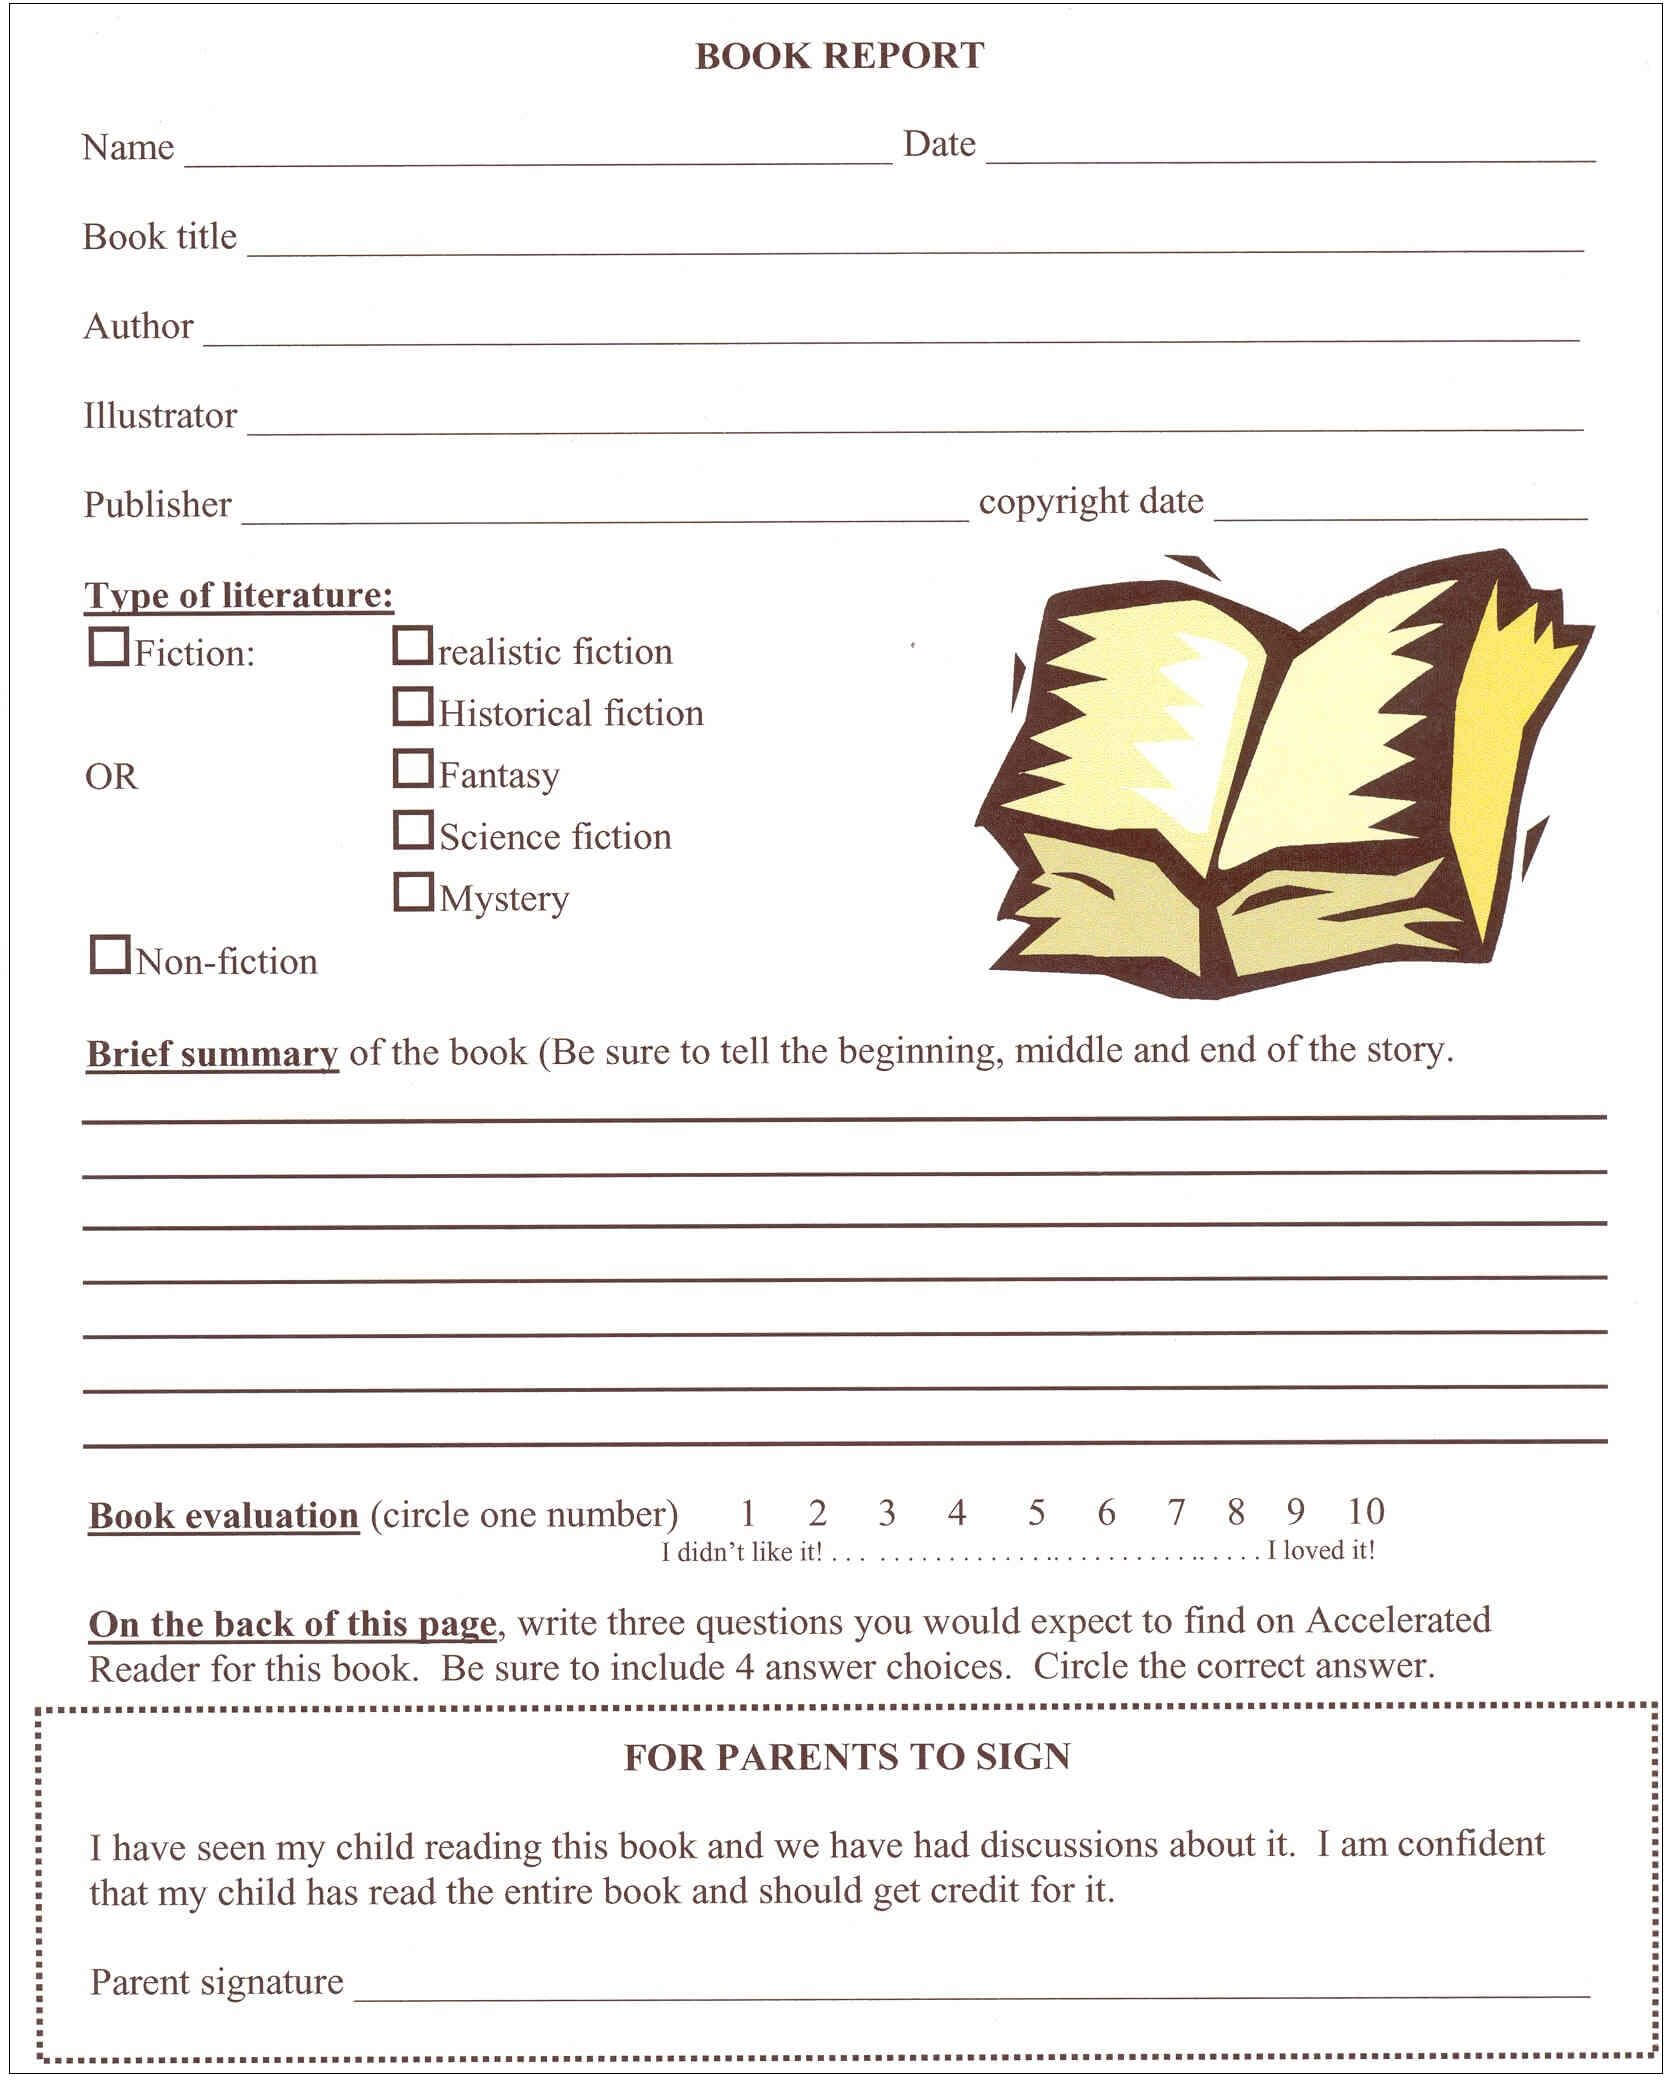 Image Result For 6Th Grade Book Report Format | Book Report For Ar Report Template